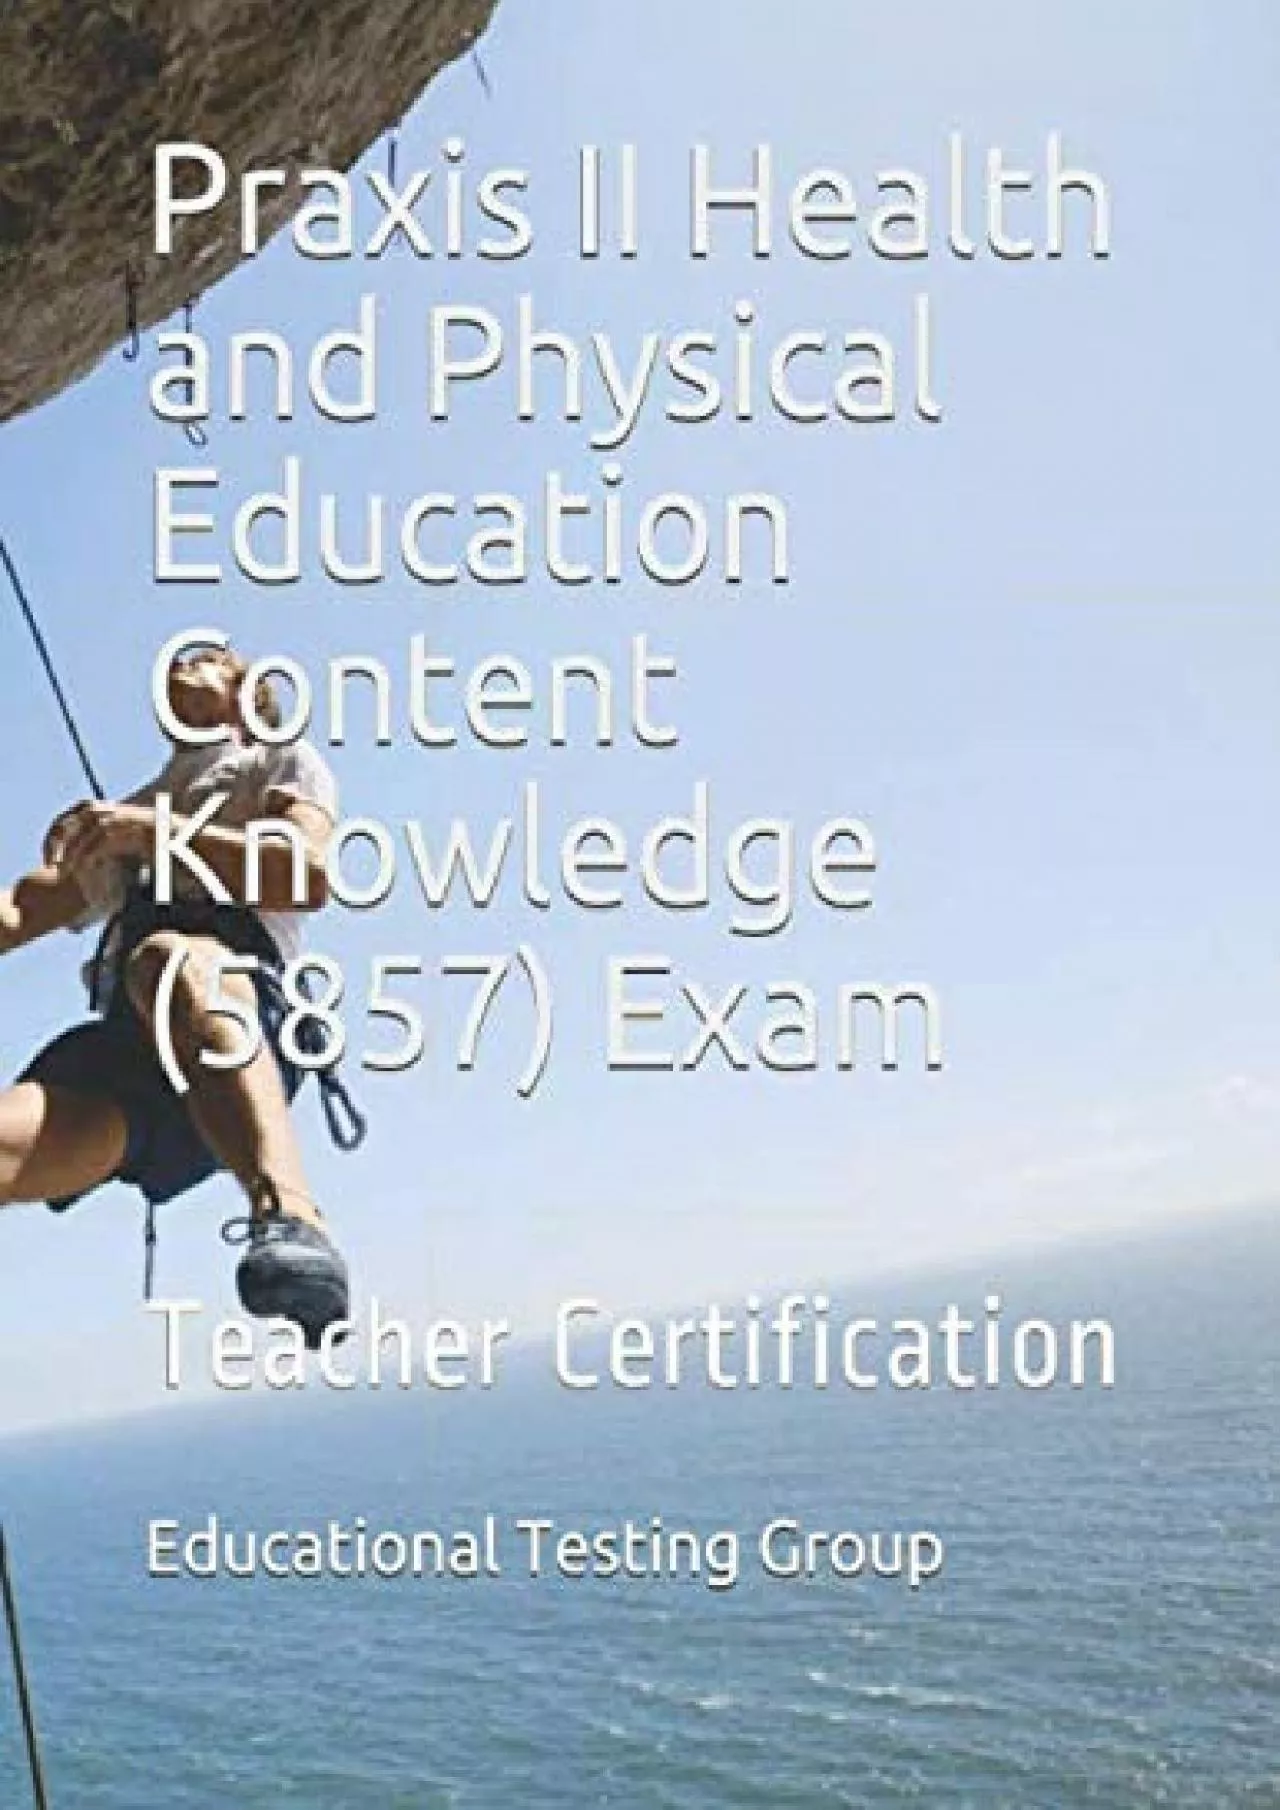 [DOWNLOAD] Praxis II Health and Physical Education Content Knowledge 5857 Exam: Teacher